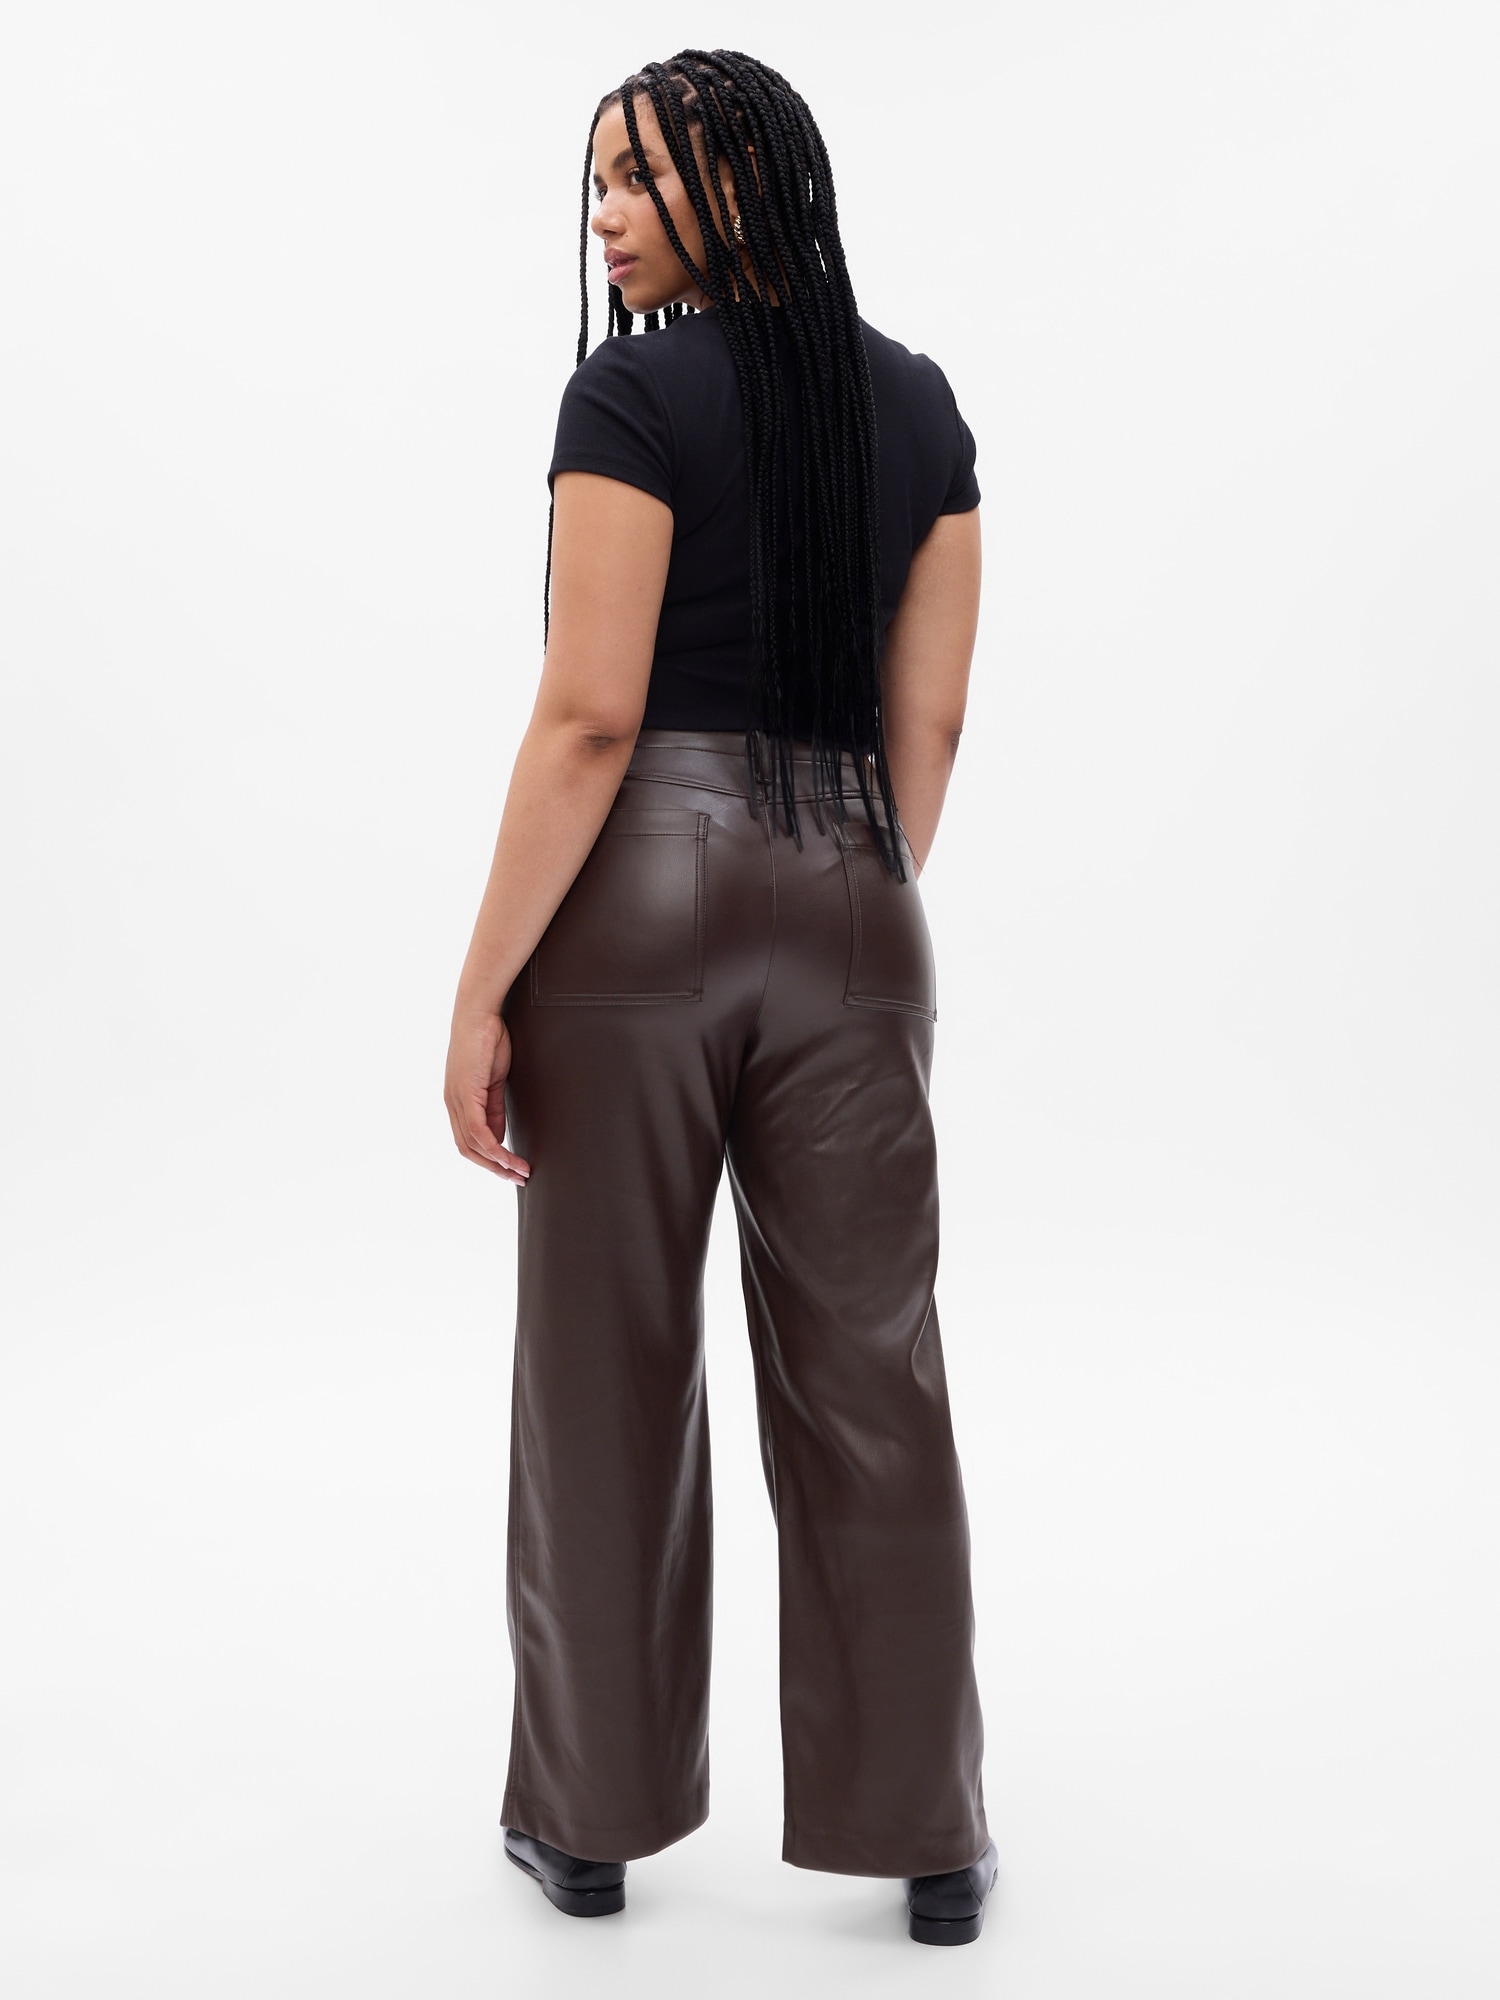 Women's Stretchable Leather Pant - Cowhide Leather Pant for Women